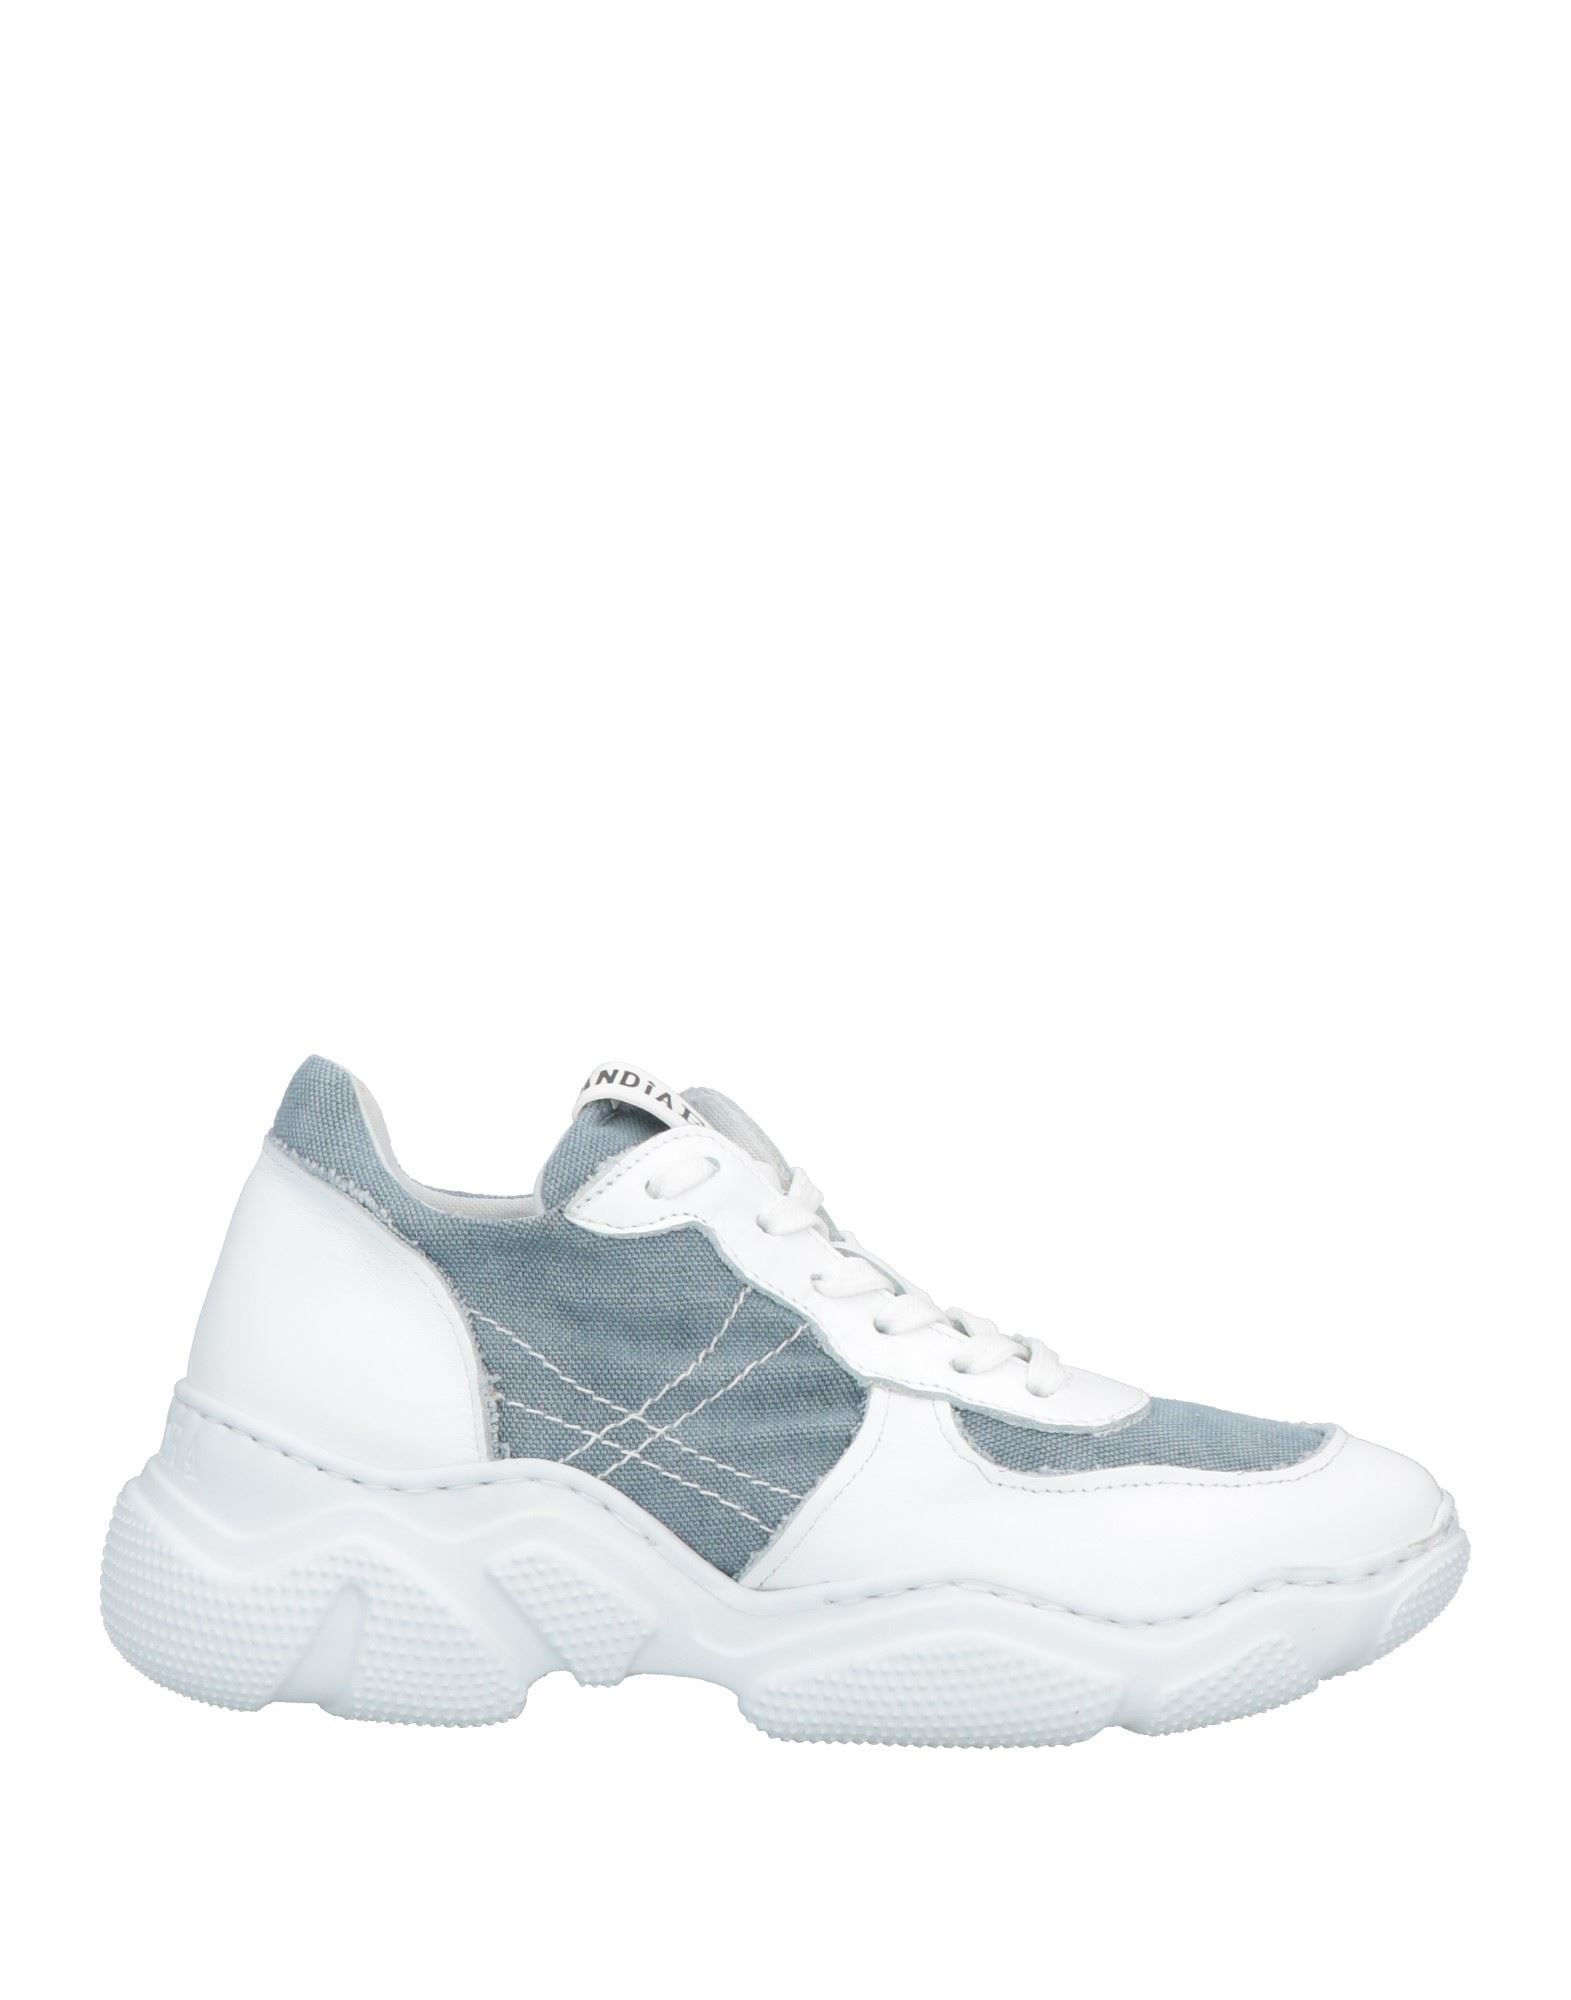 Andìa Fora Woman Sneakers White Size 5 Leather, Textile Fibers